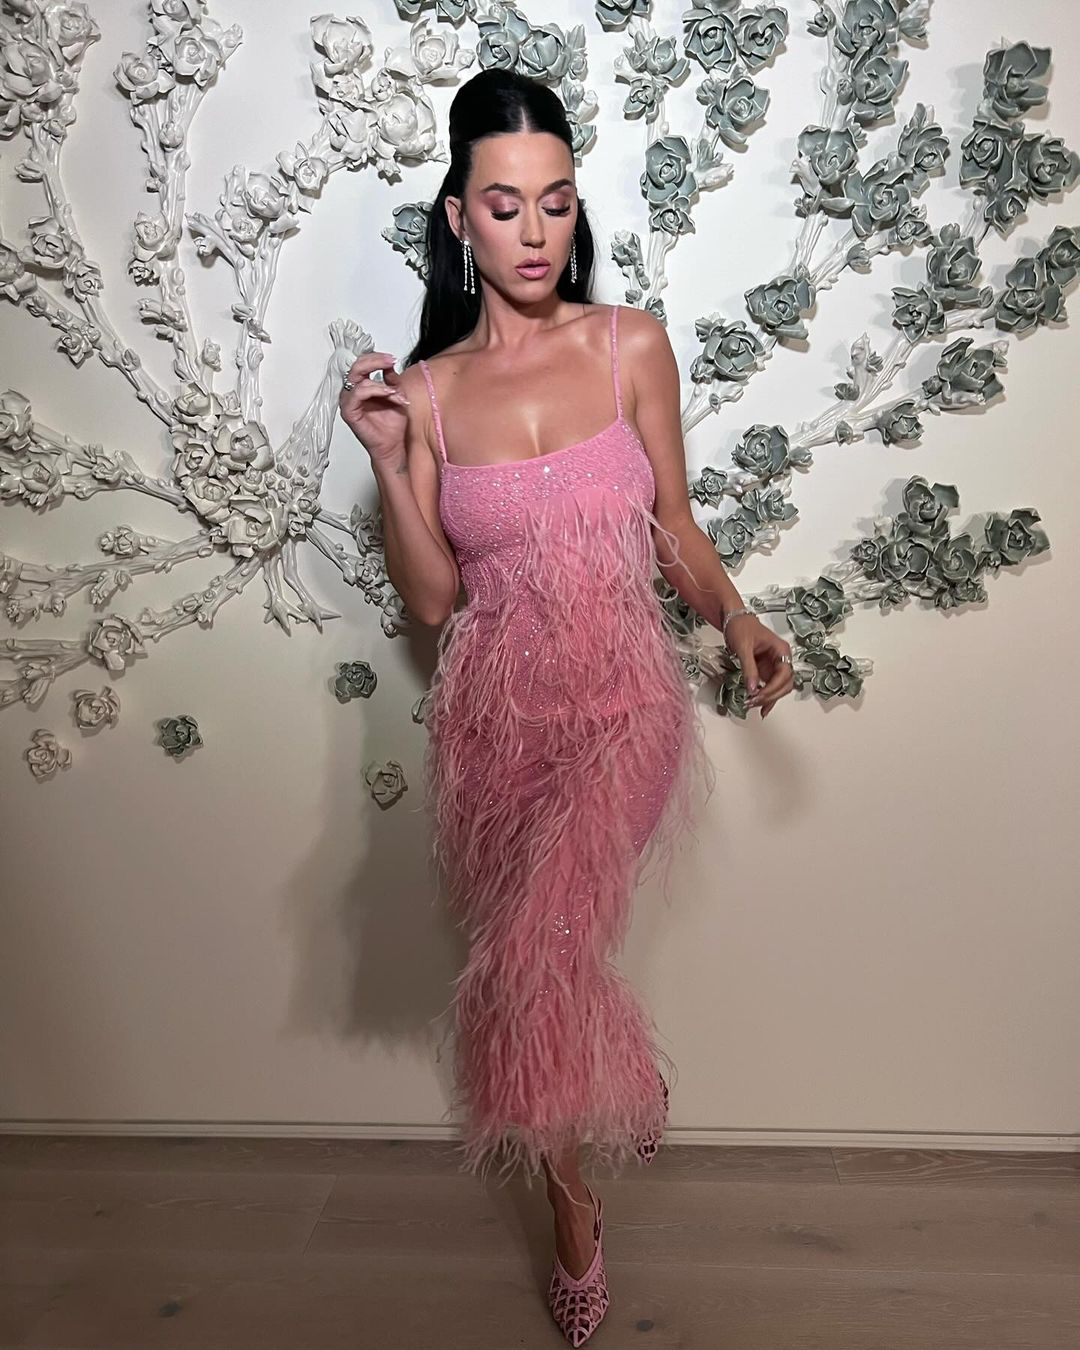 Katy showed off her fit figure in a plunging rhinestone-encrusted pink dress